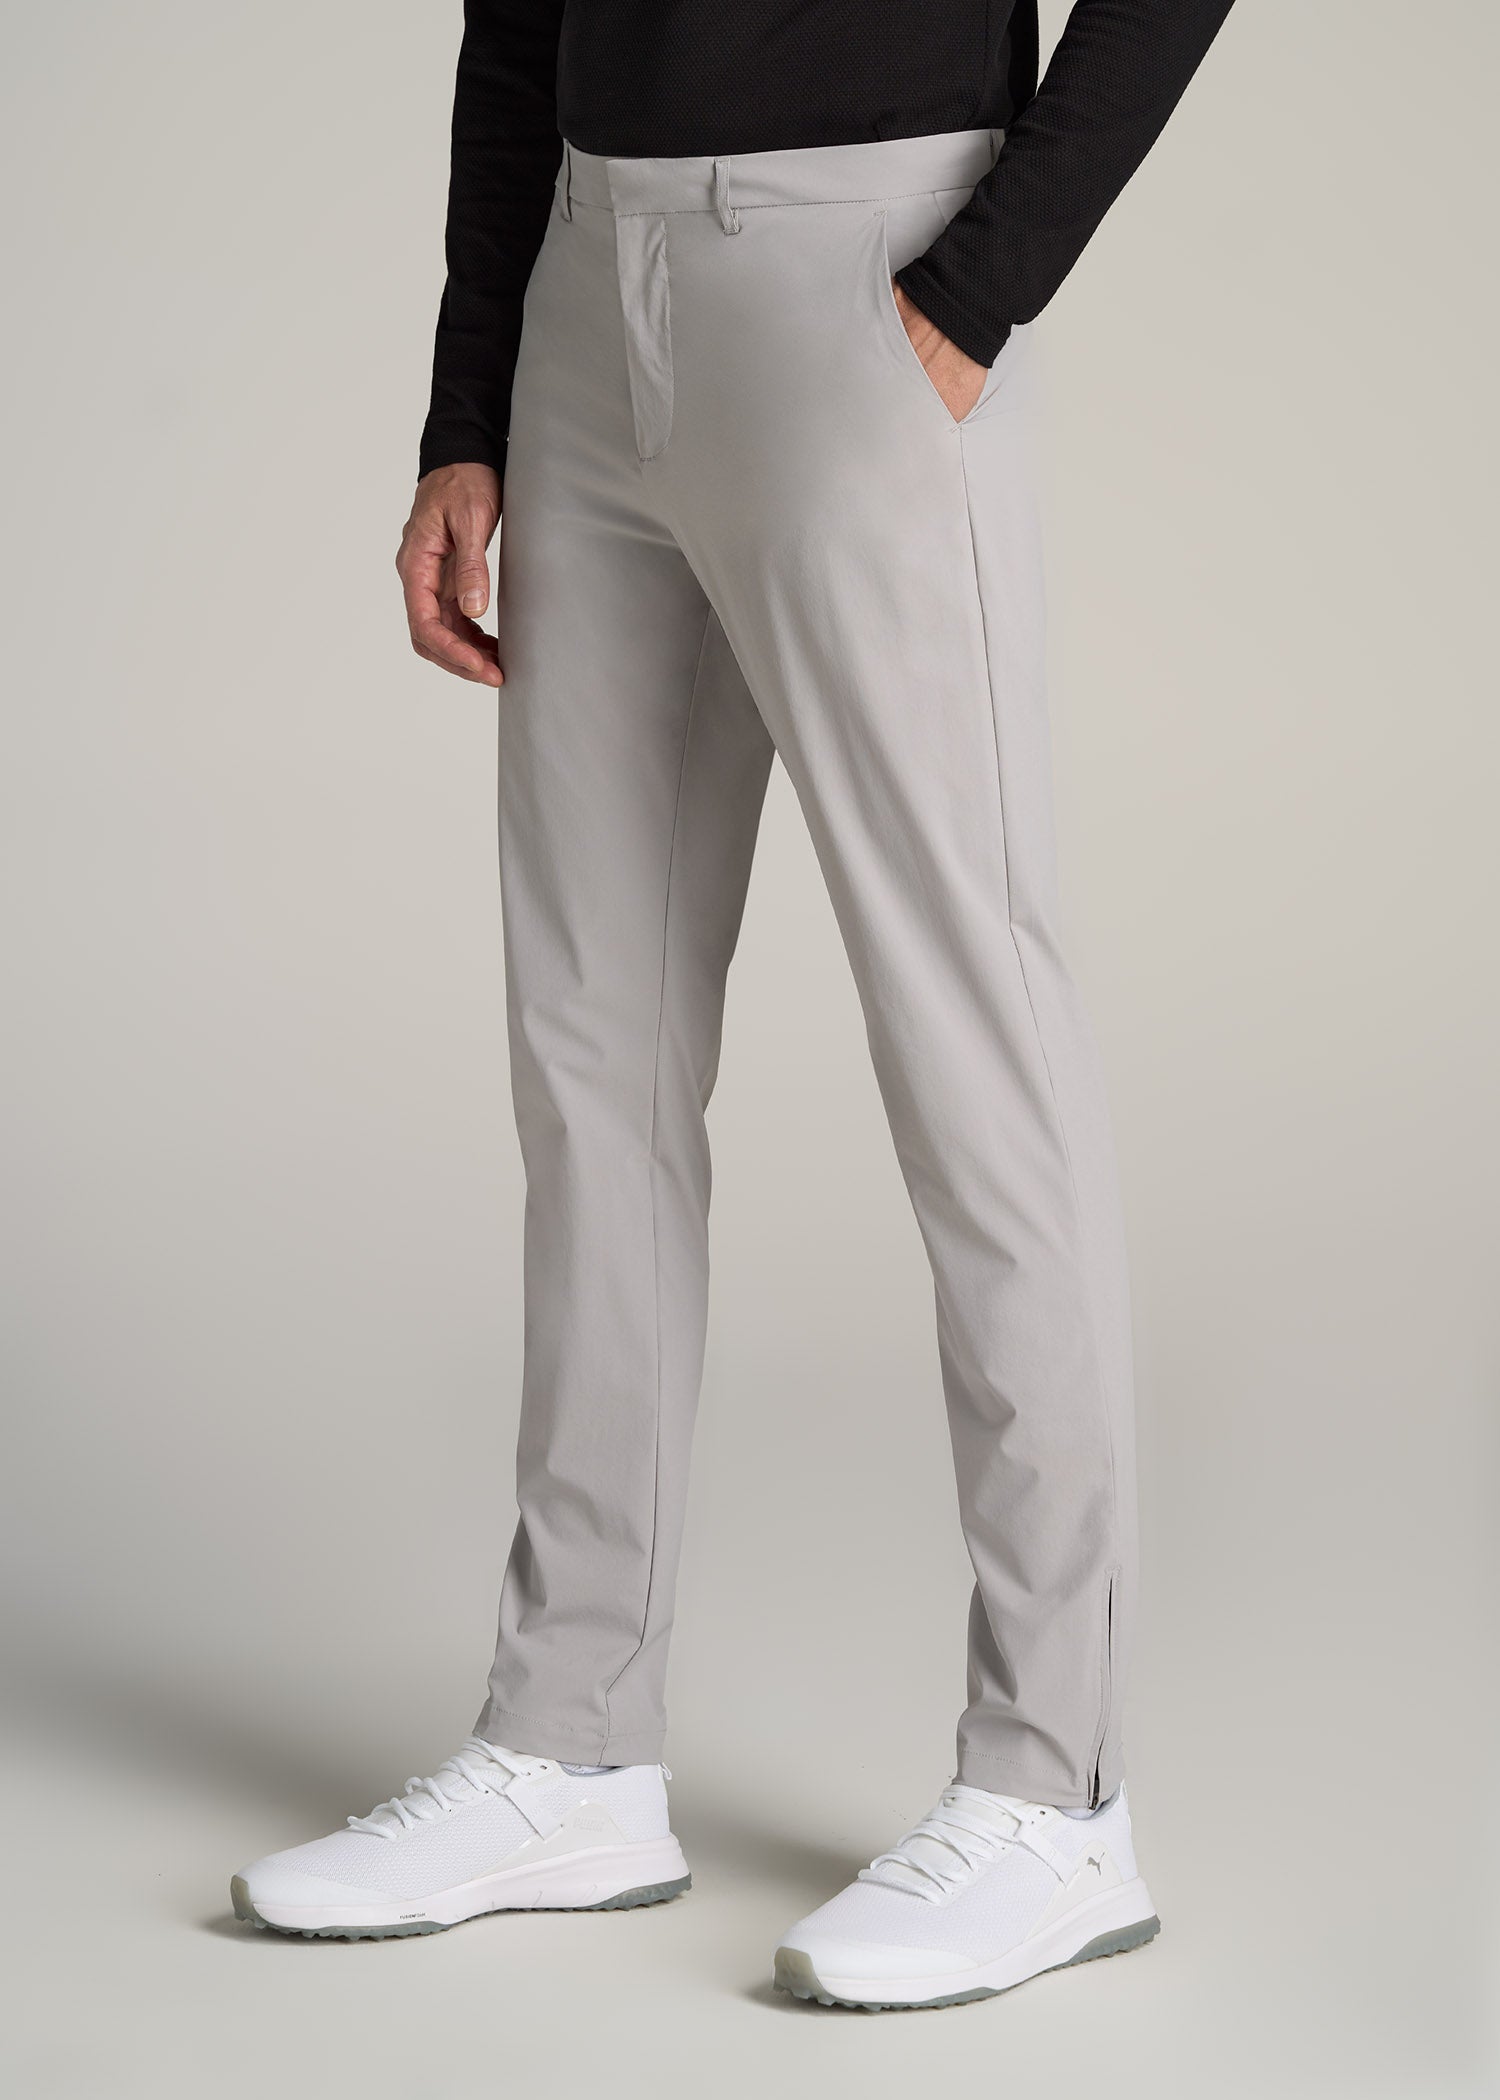 Buy Grey Trousers for Men, Grey Colour Trouser: SELECTED HOMME